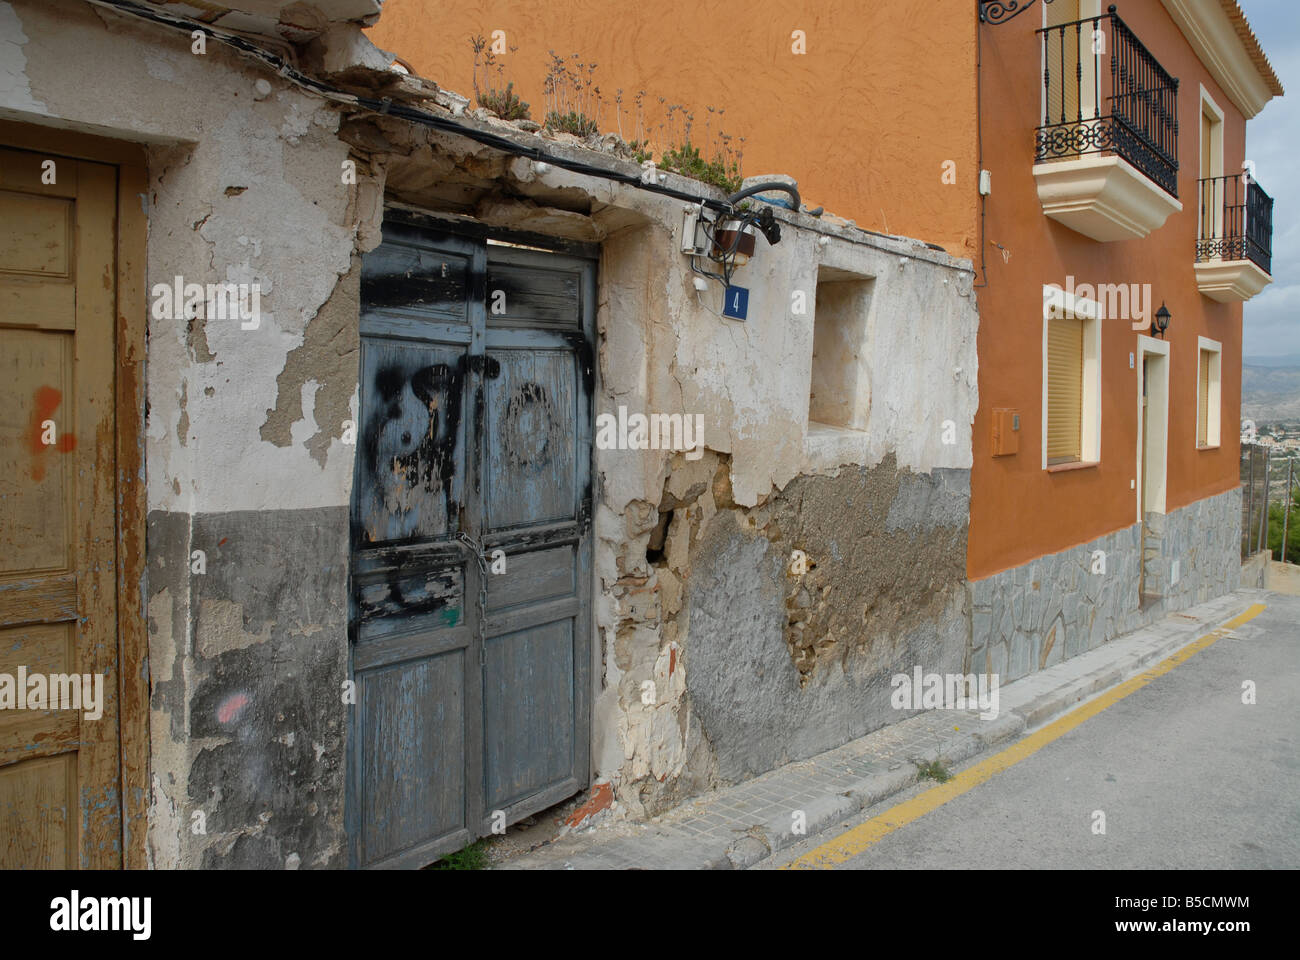 abandoned village house with graffiti, next to renovated house, Busot, Alicante Province, Comunidad Valenciana, Spain Stock Photo